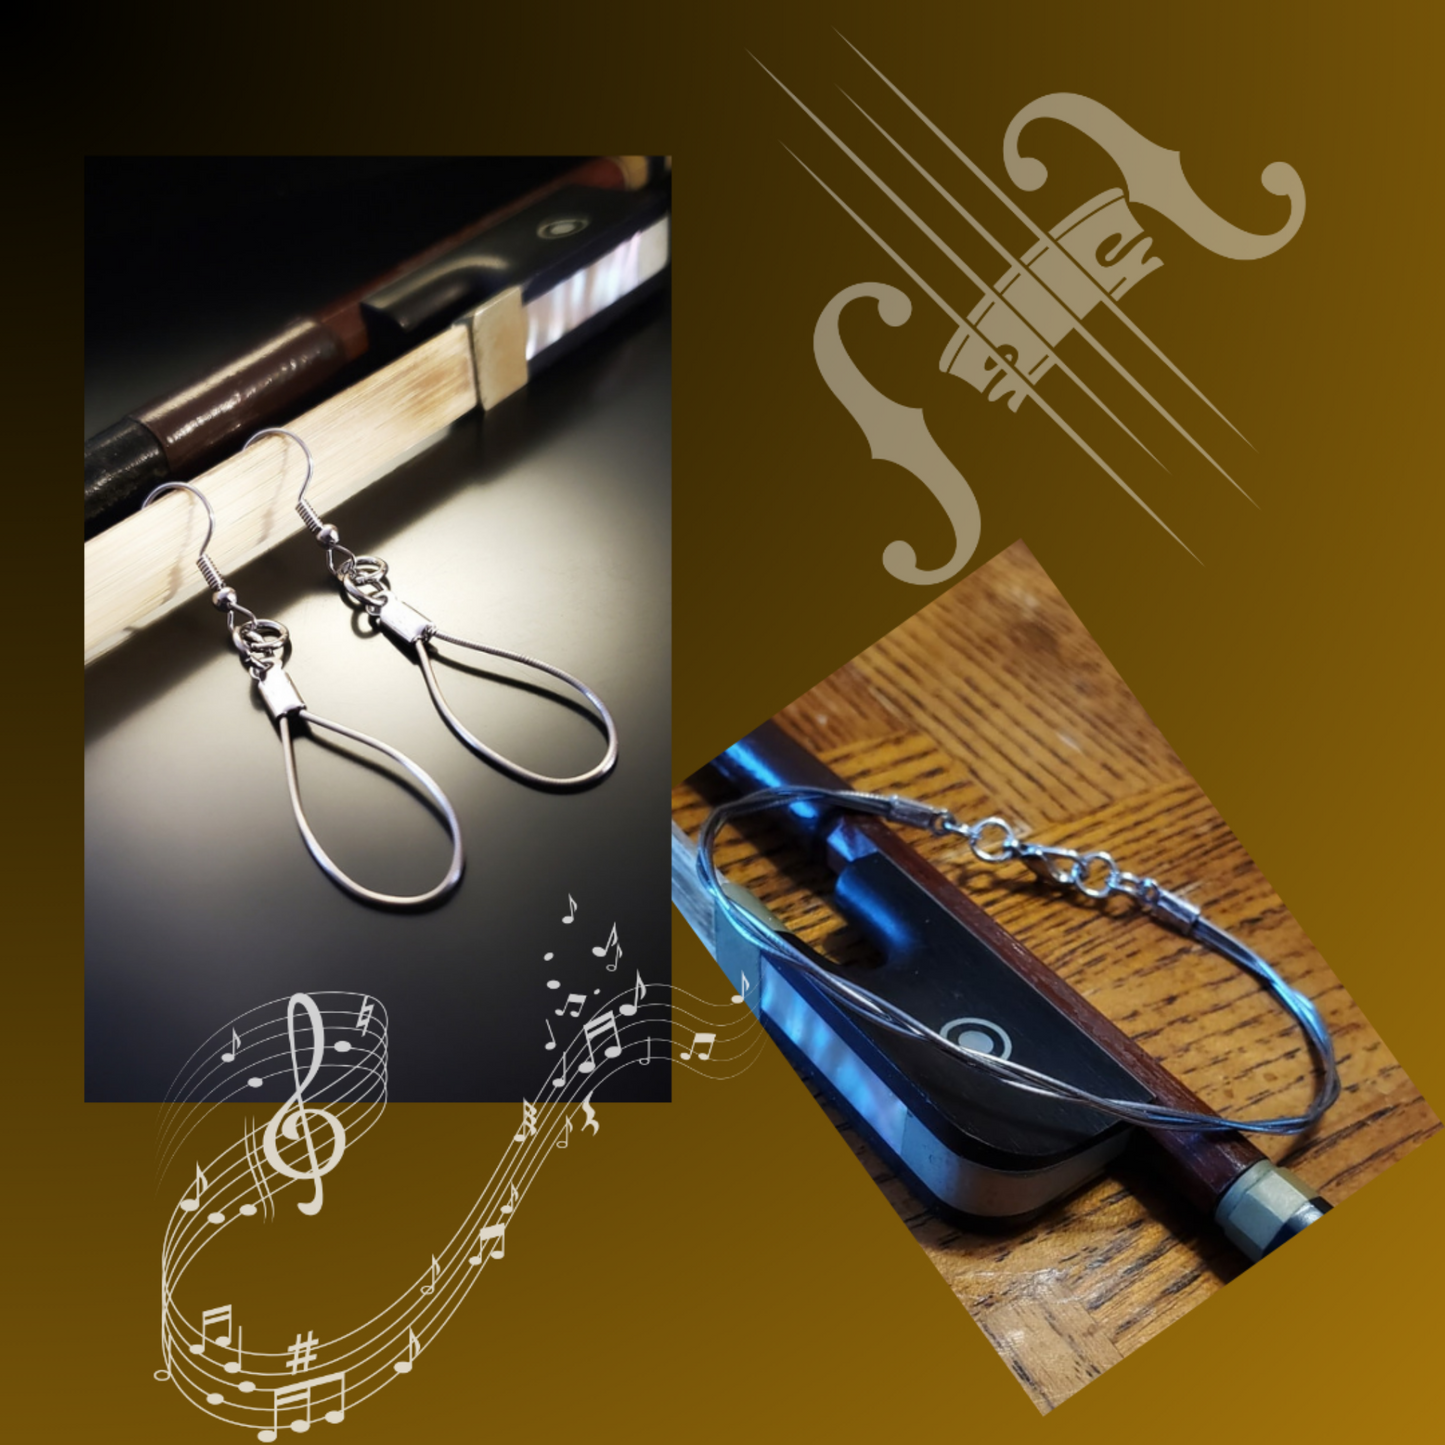 two images one of a pair of teardrop style earring made from violin strings hanging off a bow, the other of a bracelet made from upcycled violin strings lying on a bow - images of music notes and a violin bridge- gold and brown background